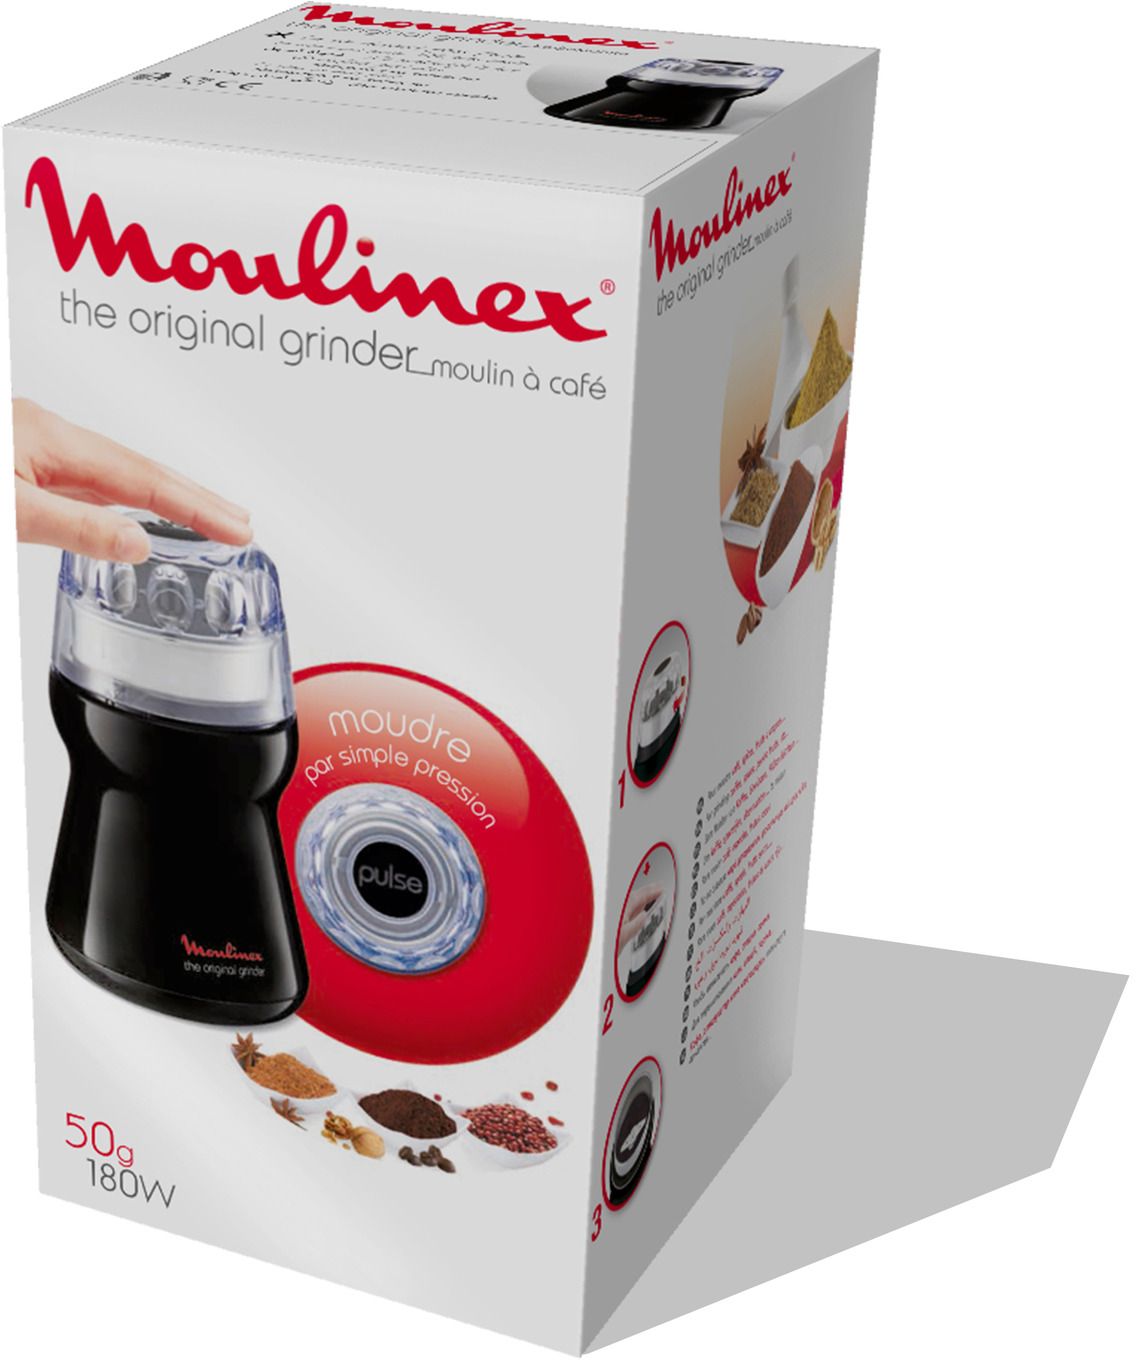  Moulinex AR110830 Simply Invents